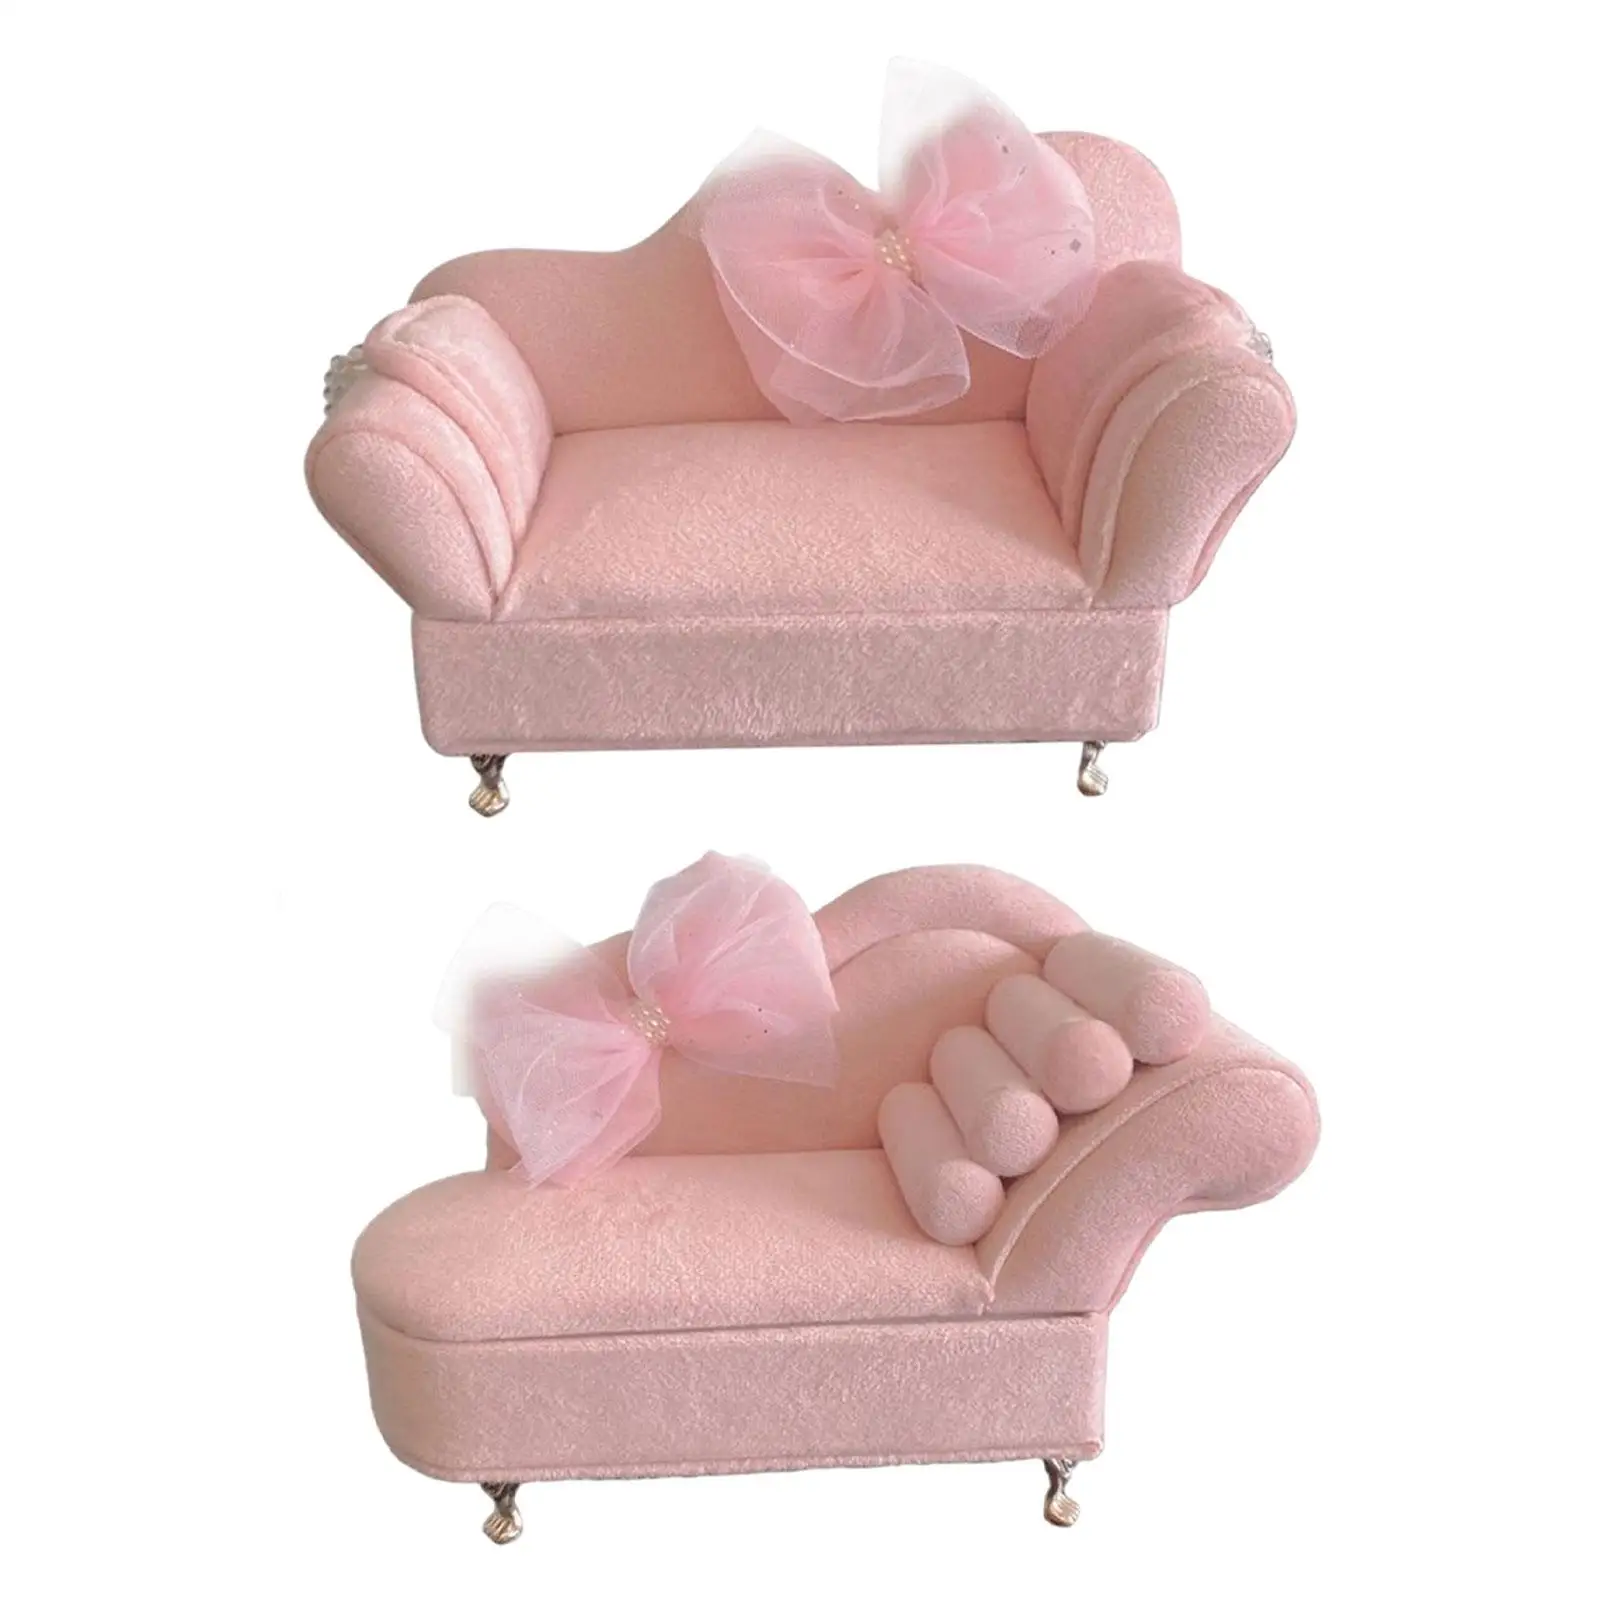 1/12 Sofa,6in Doll Figures Accessory, Bedroom Room Ornaments, Miniature Jewelry Storage Case